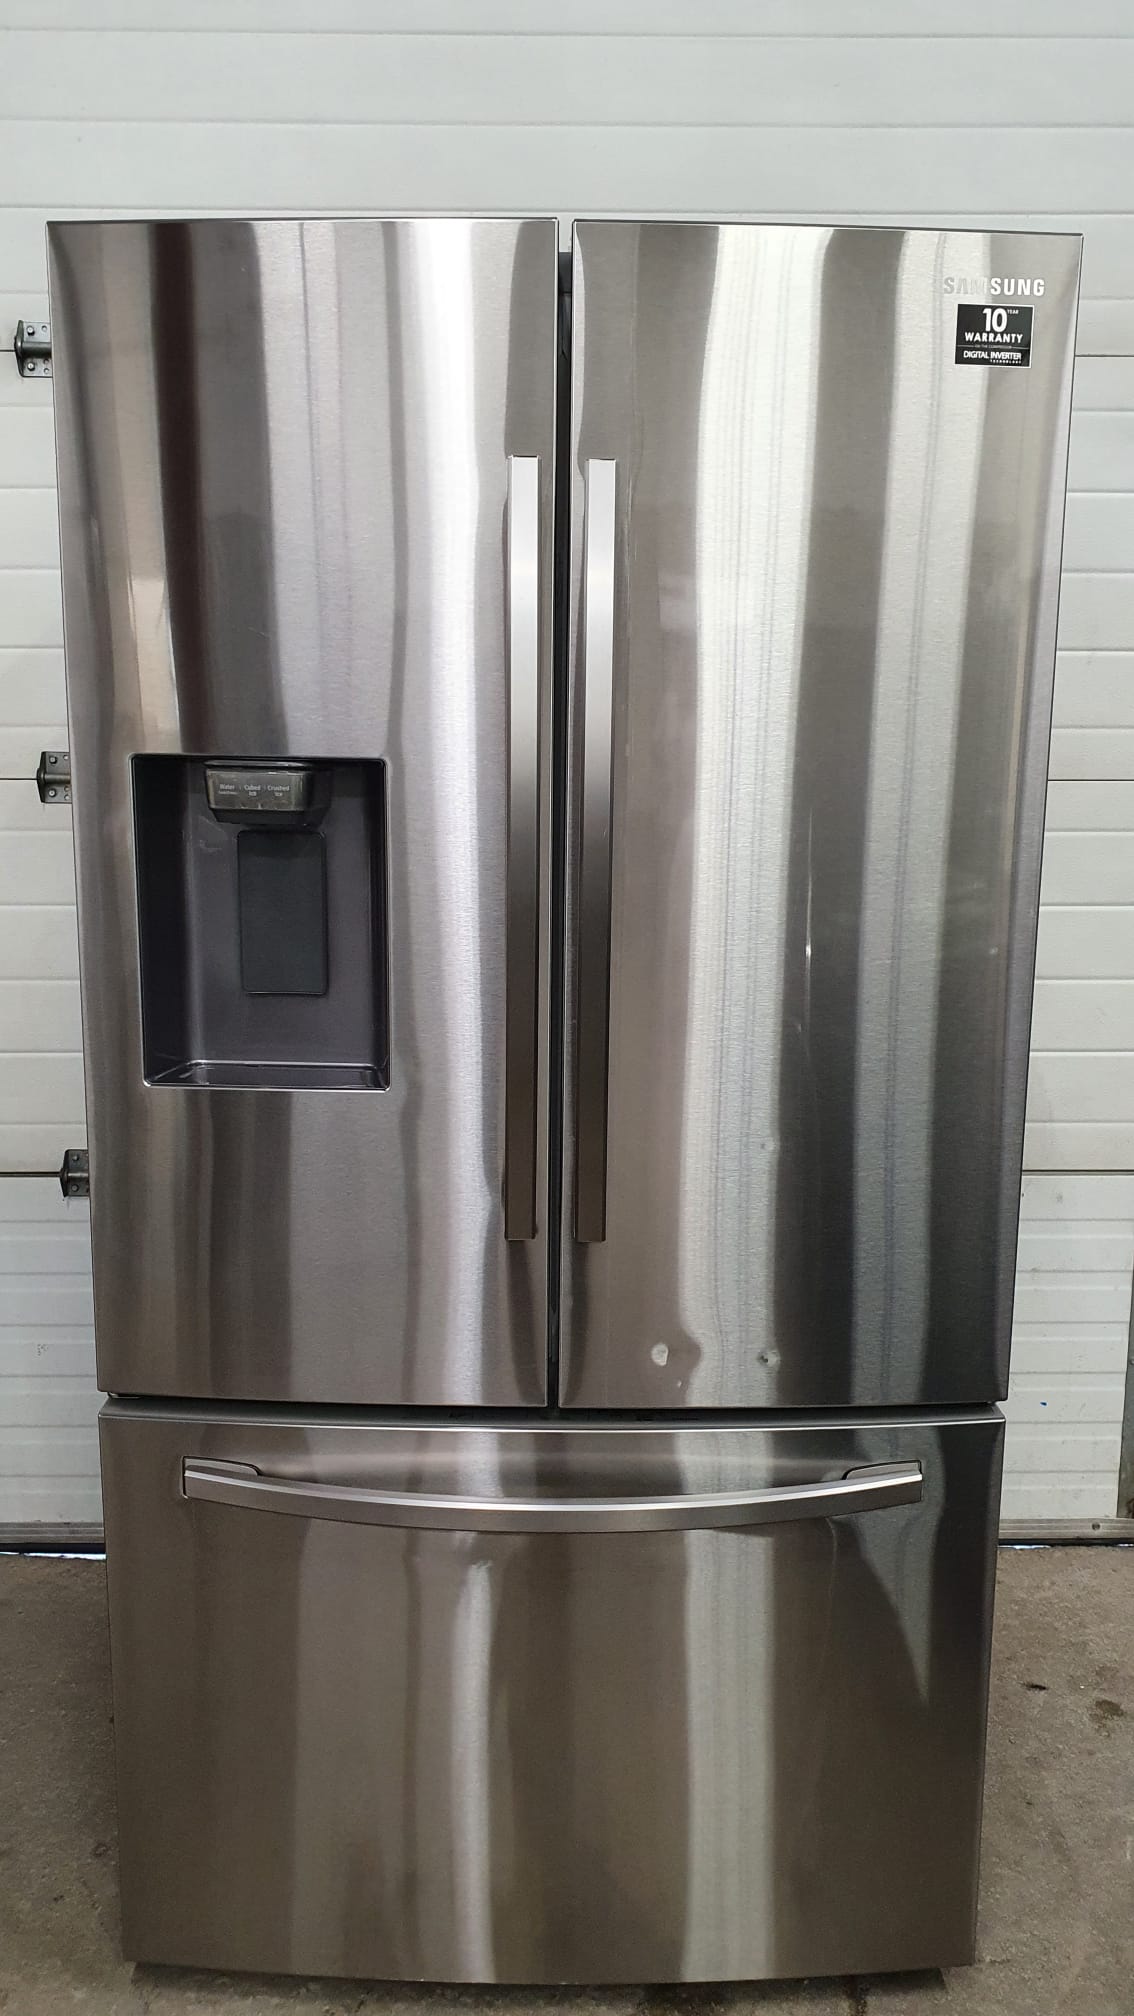 Order Your Used Less Than 1 Year Samsung Refrigerator RF27T5201SR Today!